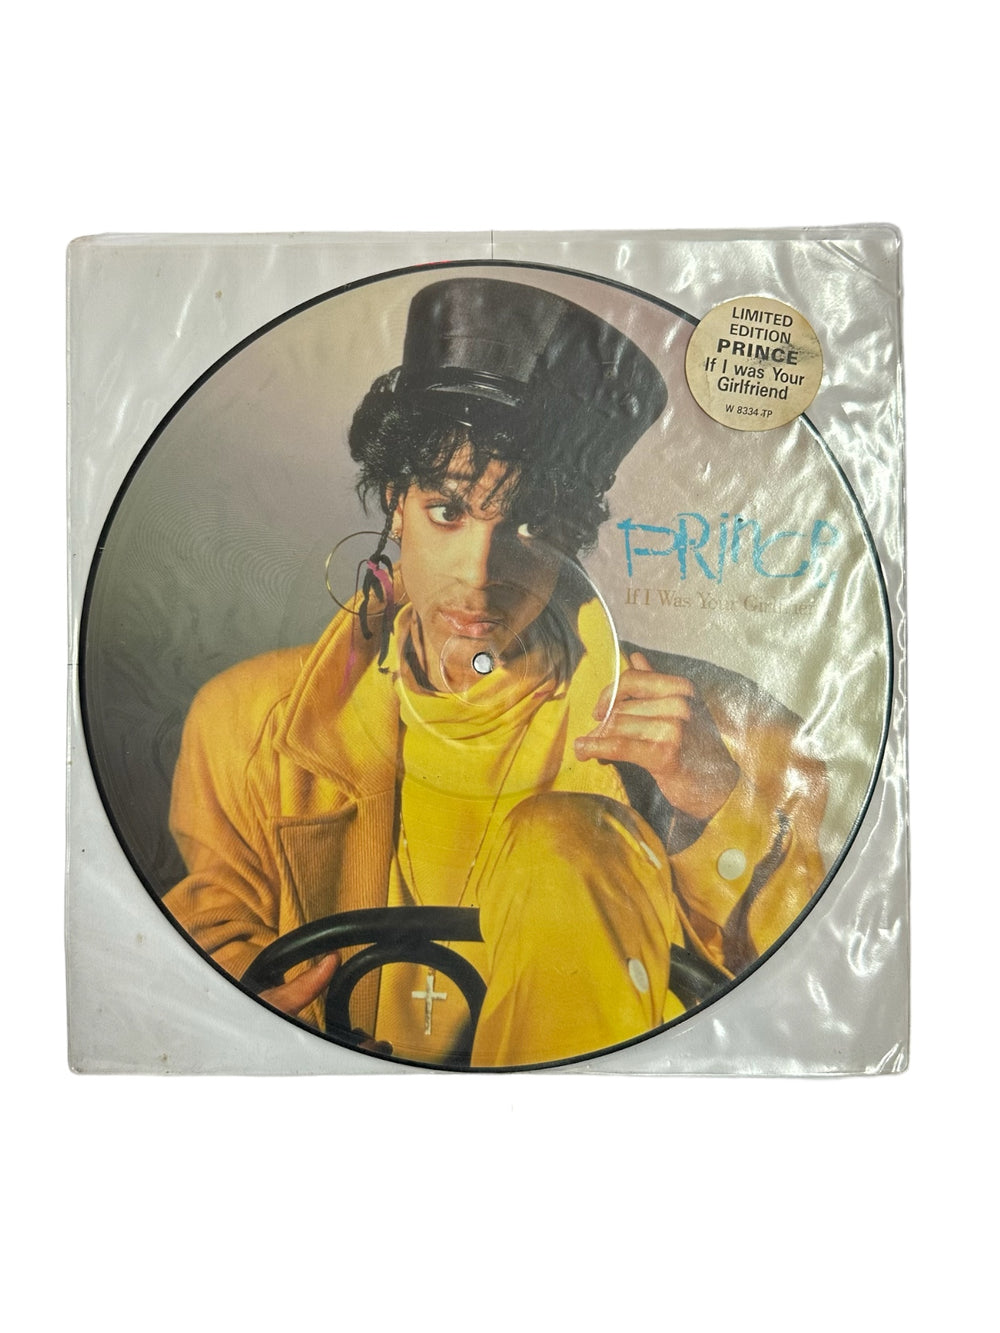 Prince – If I Was Your Girlfriend Vinyl 12" Single LTD Edition Picture Disc Hype UK Preloved: 1987